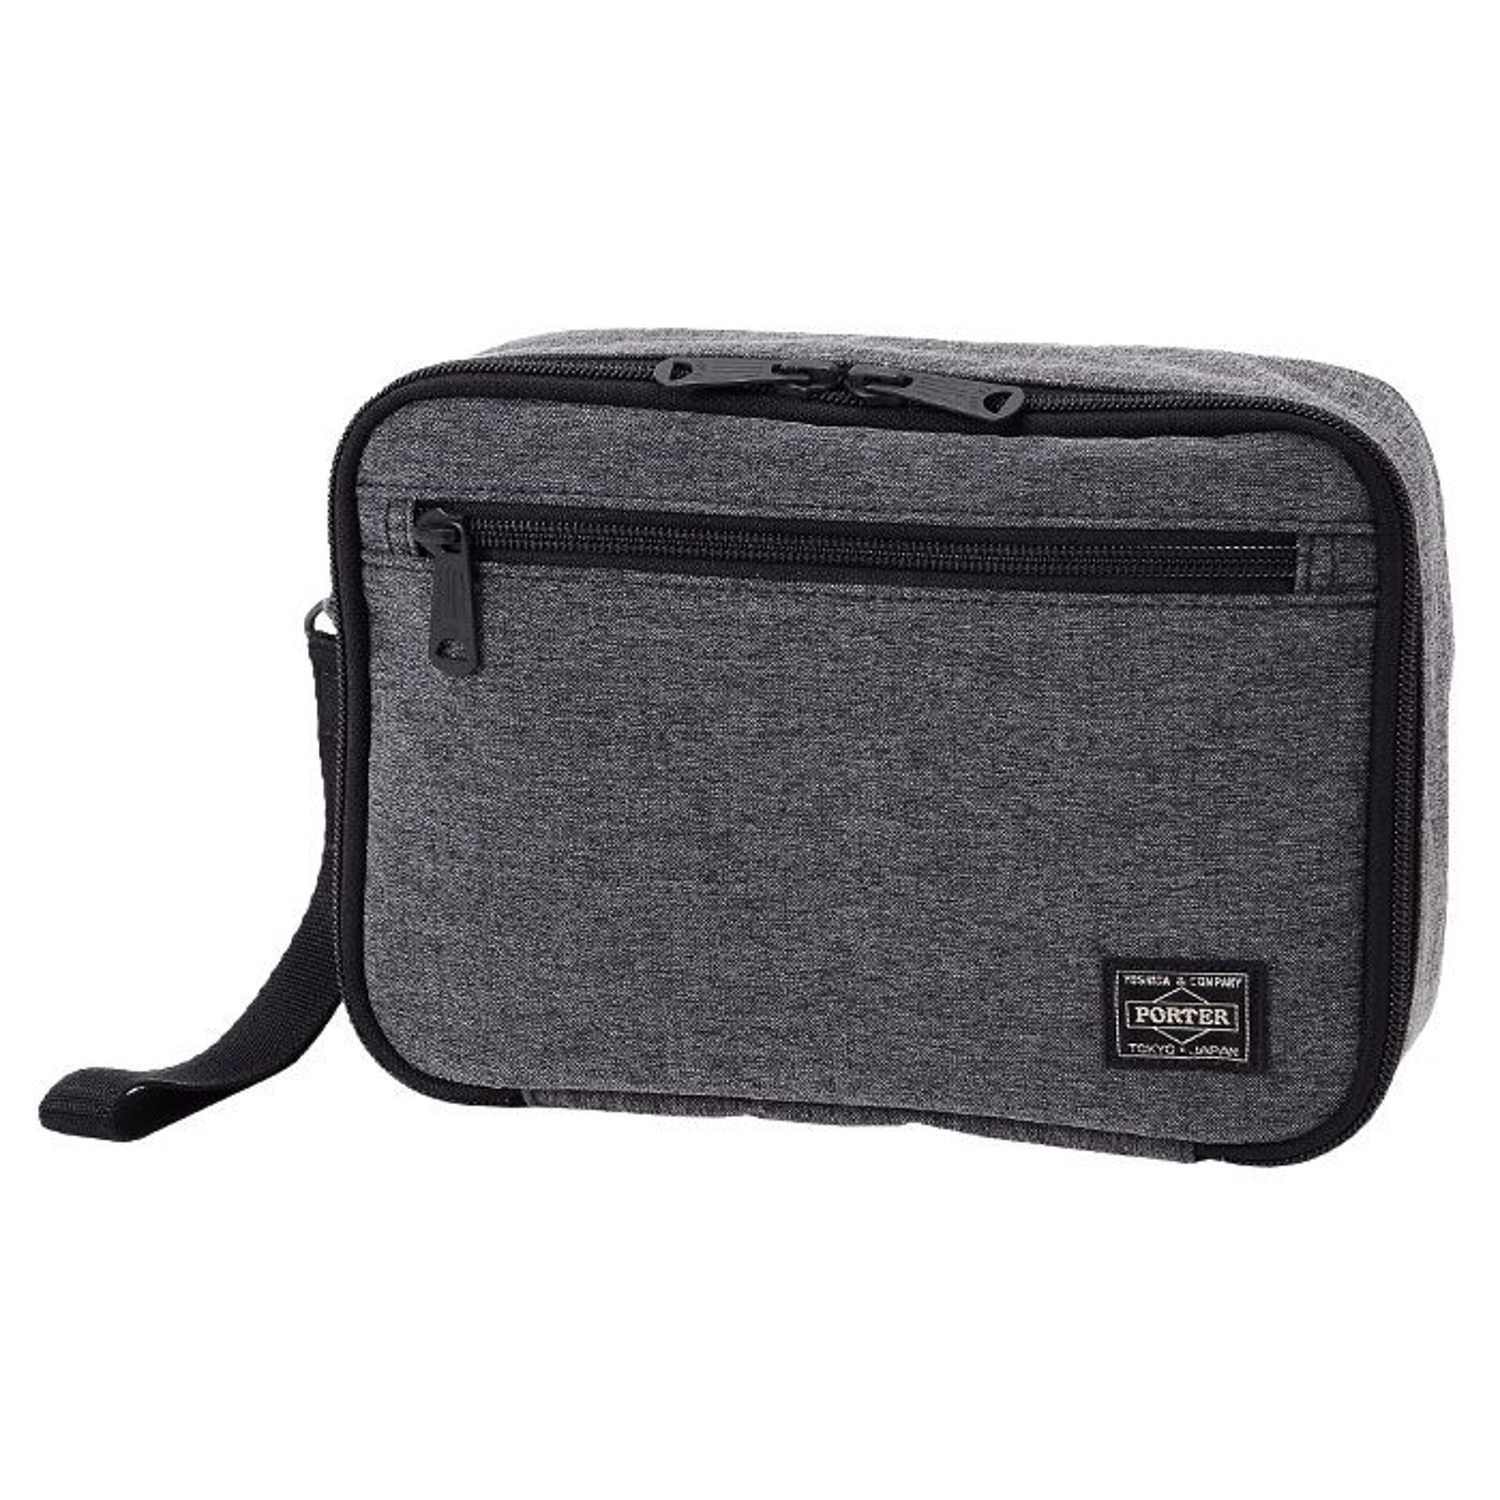 PORTER / FUNCTION / POUCH (103913)